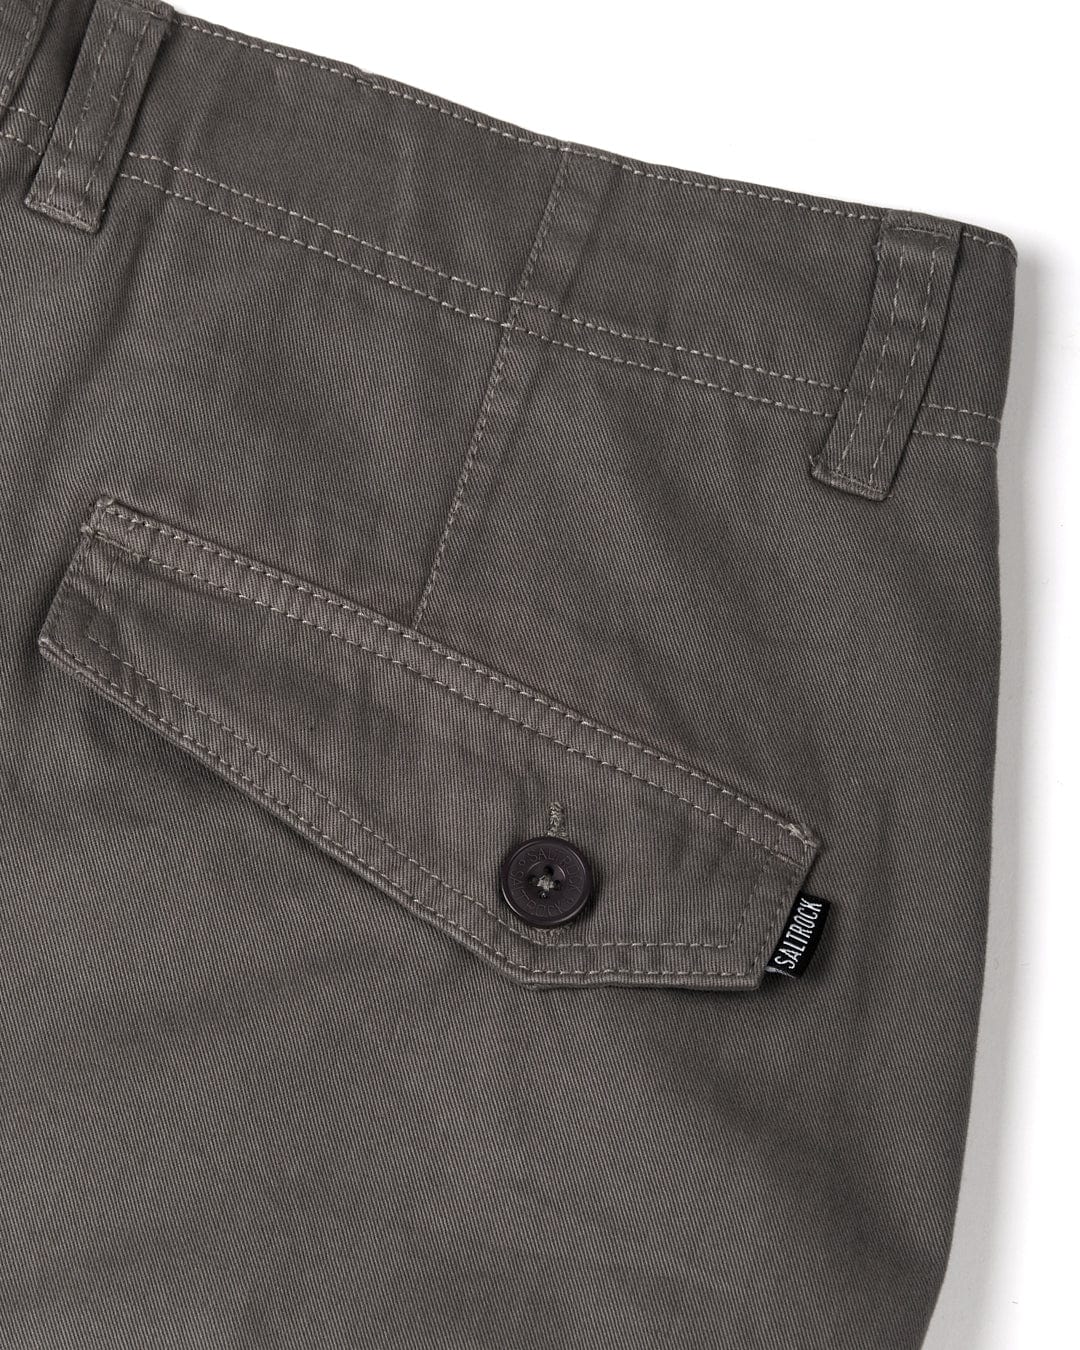 Saltrock Godrevy 2 - Mens Cargo Trousers - Dark Grey with a back pocket, button closure, and belt loops.